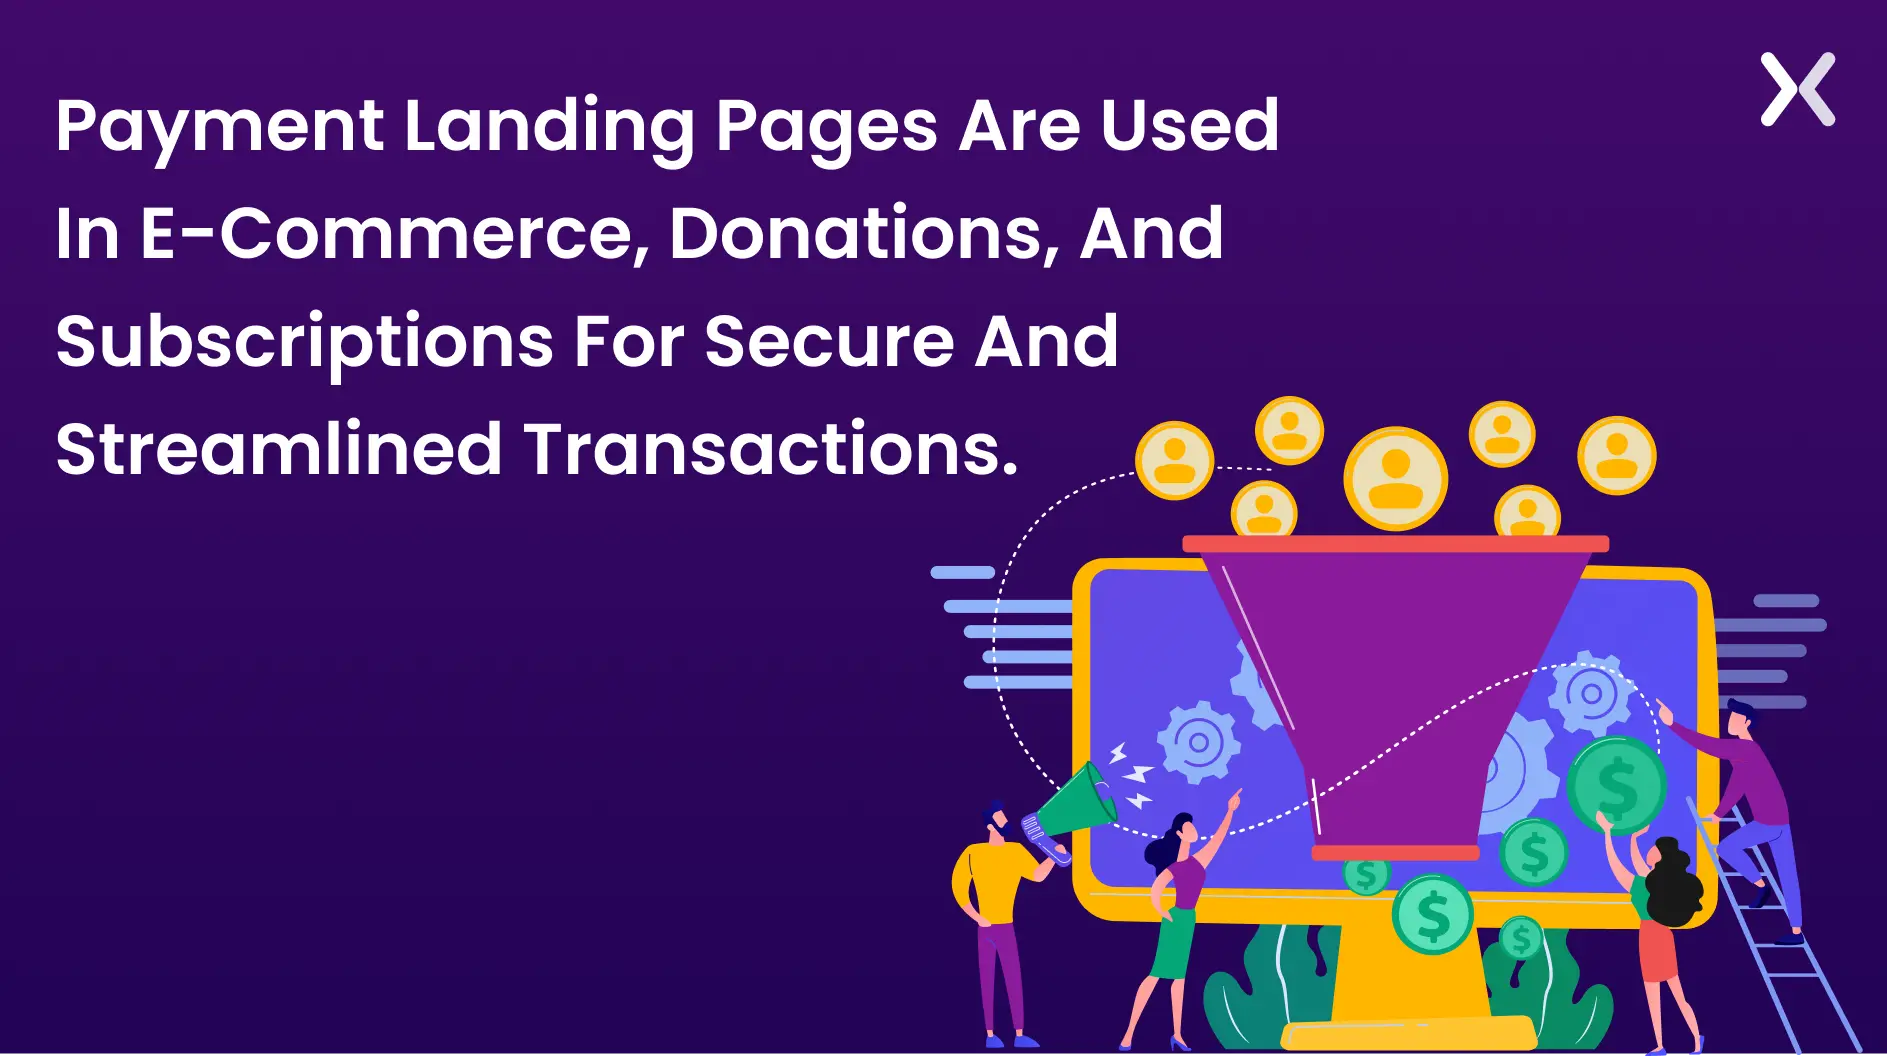 where-to-use-payment-landing-pages-933c3c.webp